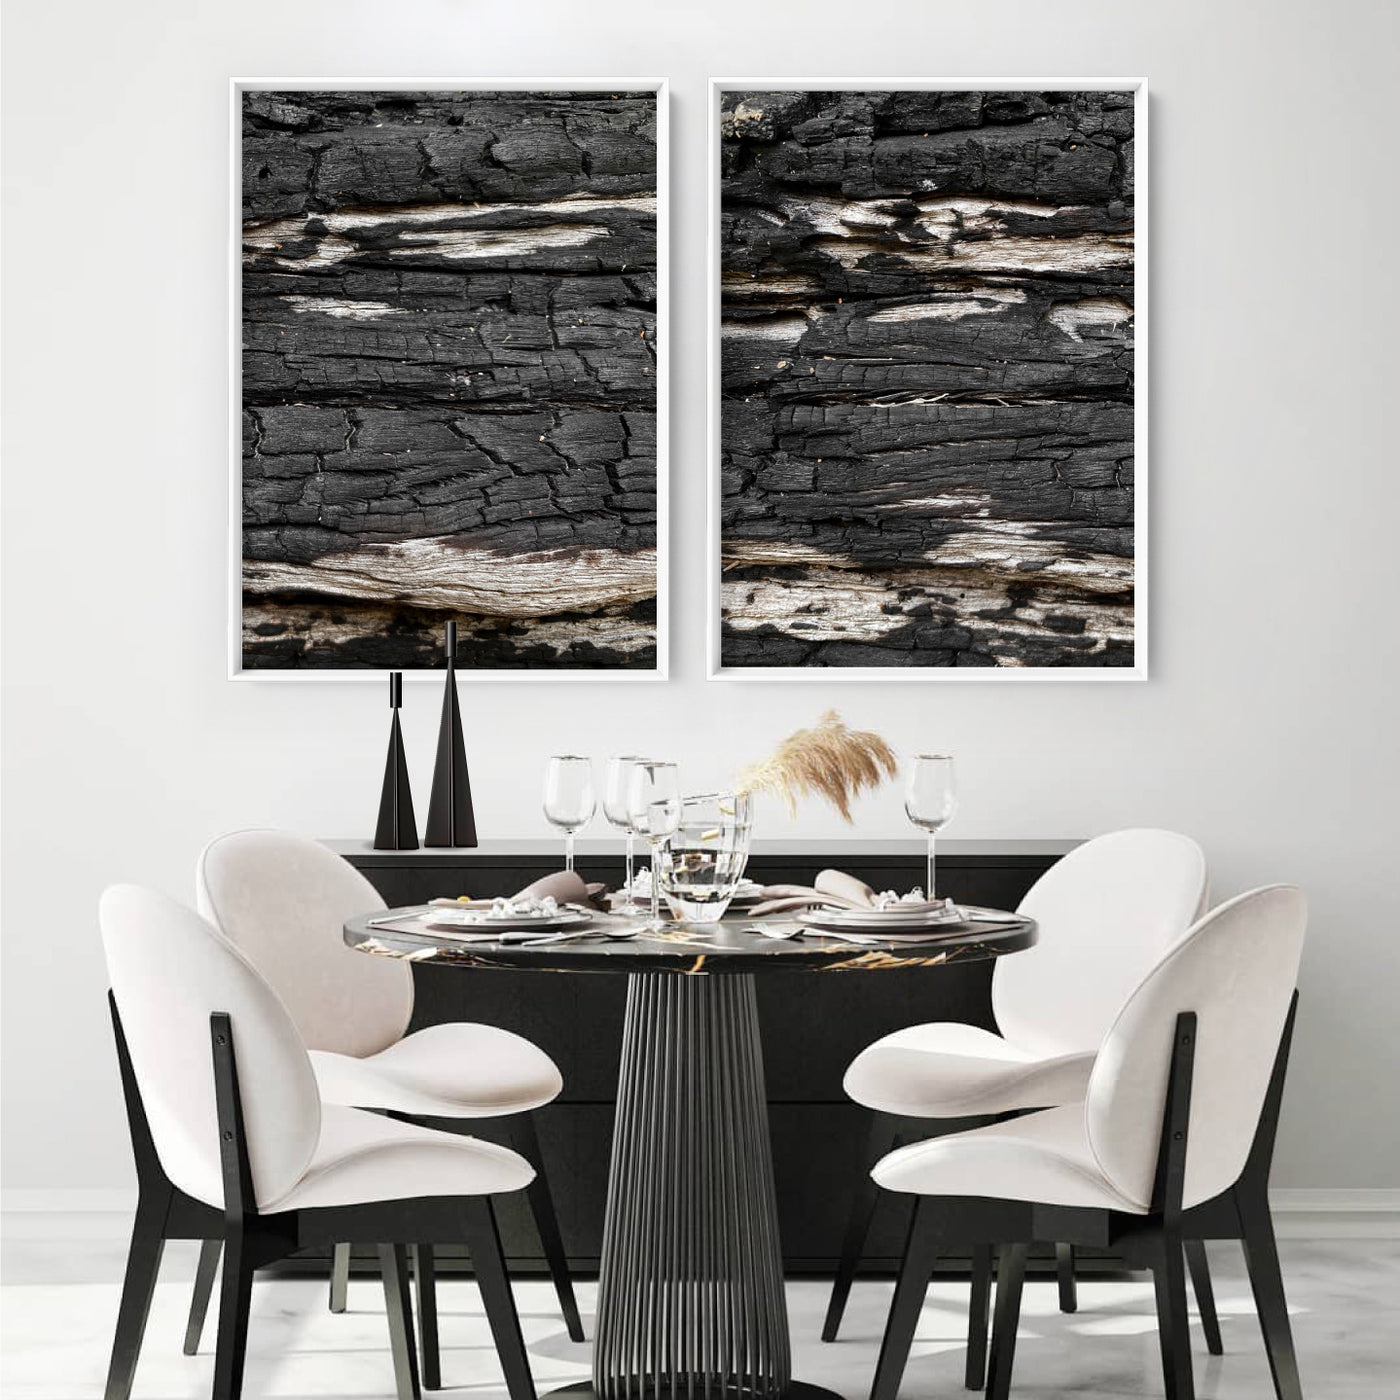 Gumtree | Charred Eucalypt VI - Art Print, Poster, Stretched Canvas or Framed Wall Art, shown framed in a home interior space